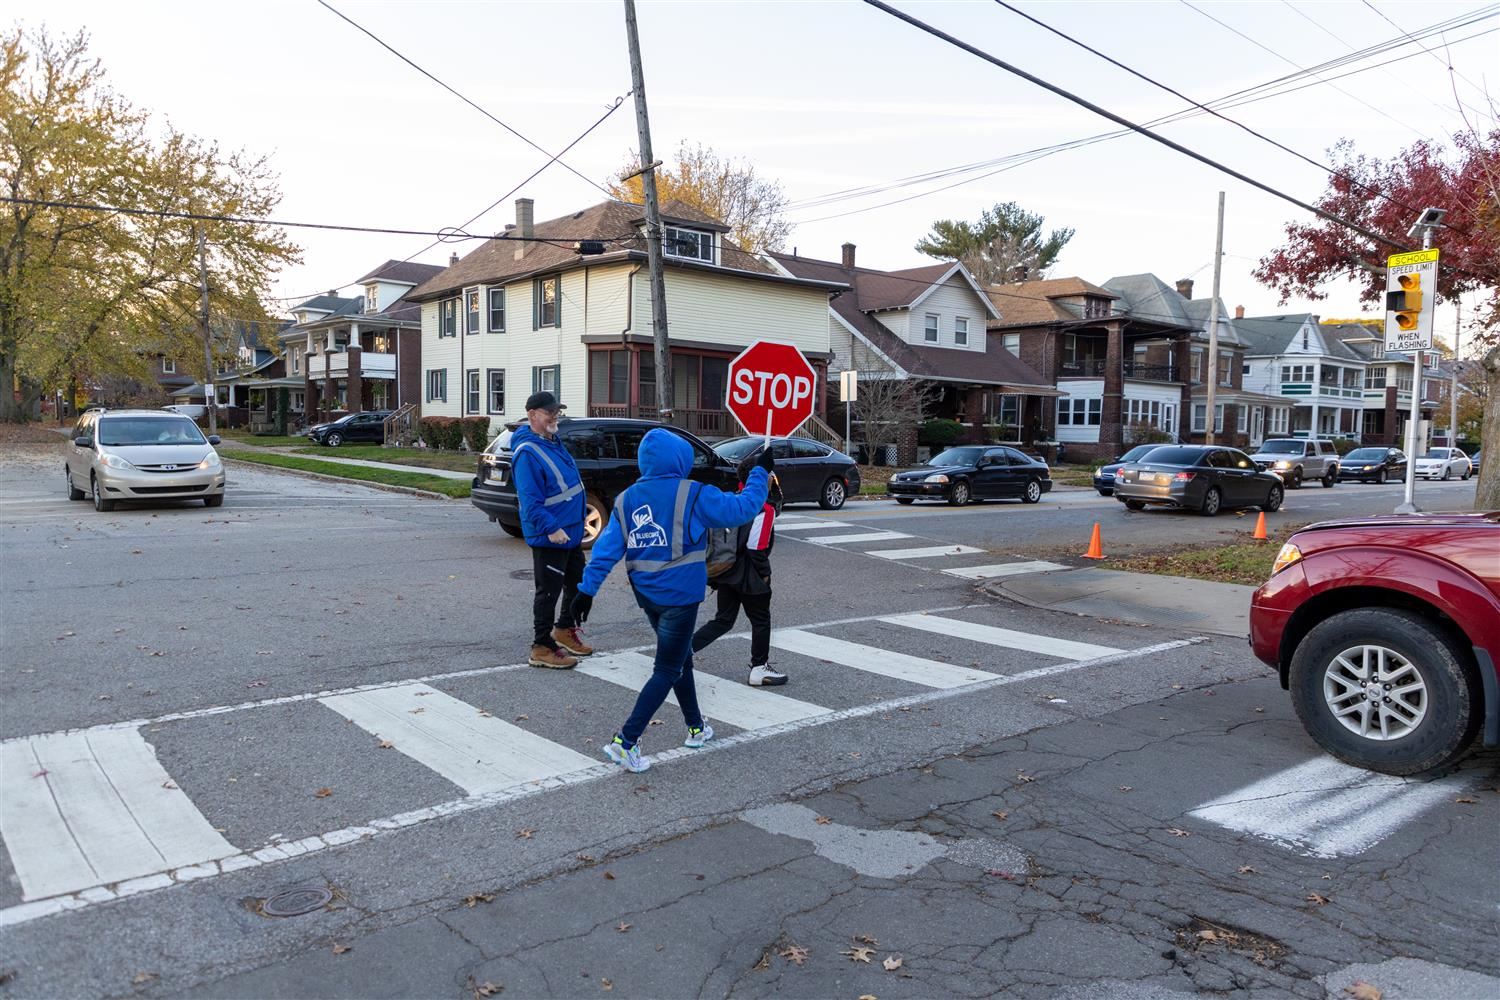 A member of the Blue Coats peacekeeping initiative helps students cross the road safely.